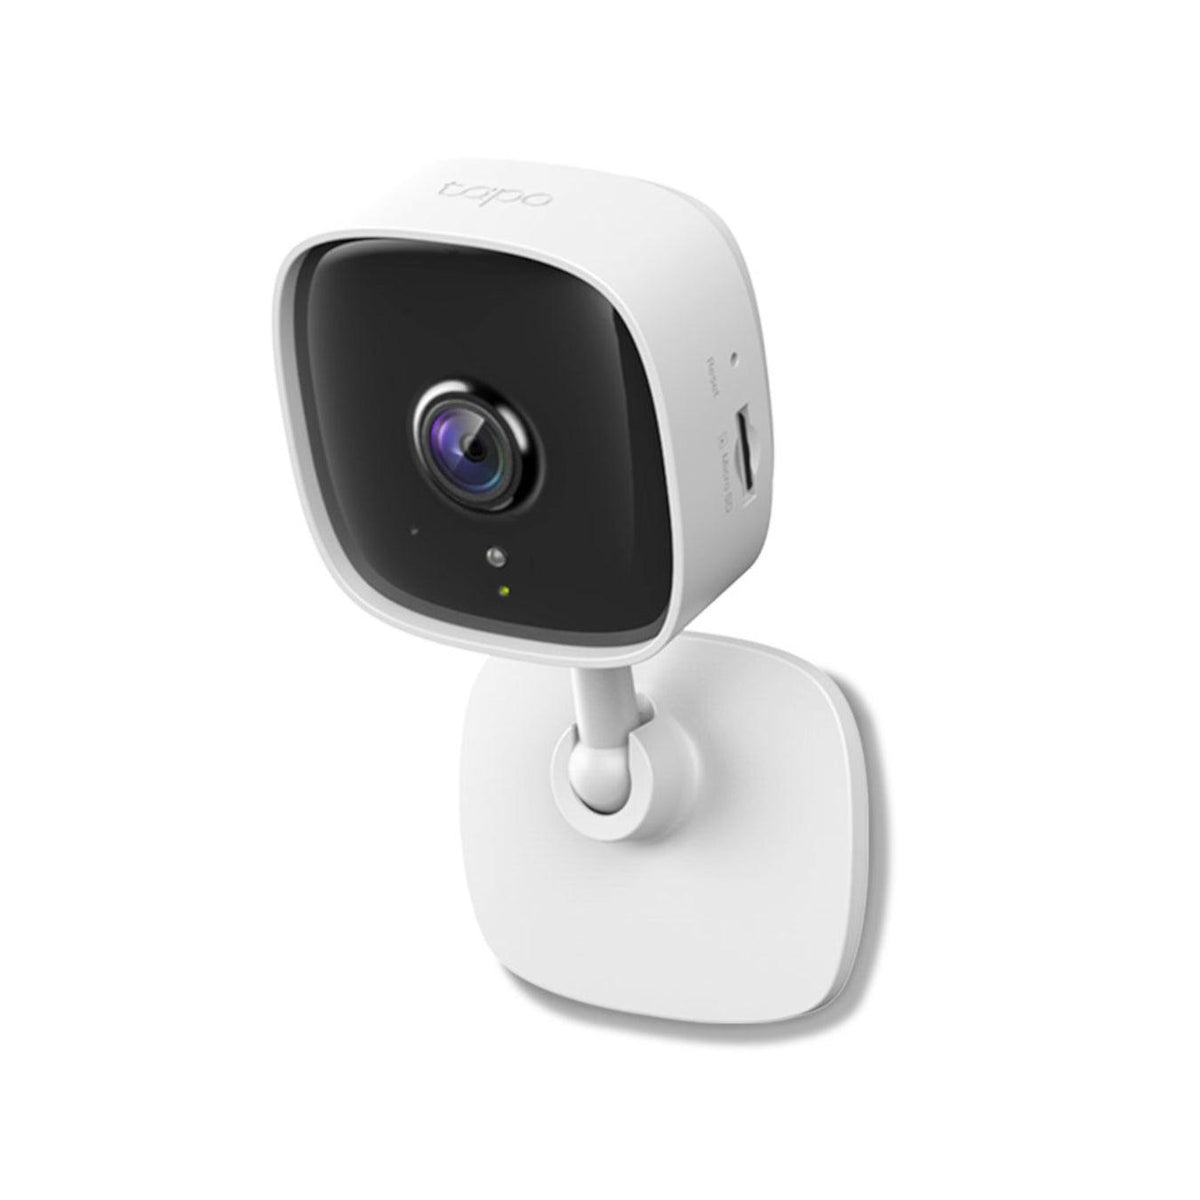 TP-Link Tapo C100 Home Security Wi-Fi Camera - White | TAPO C100 (6890858152124)